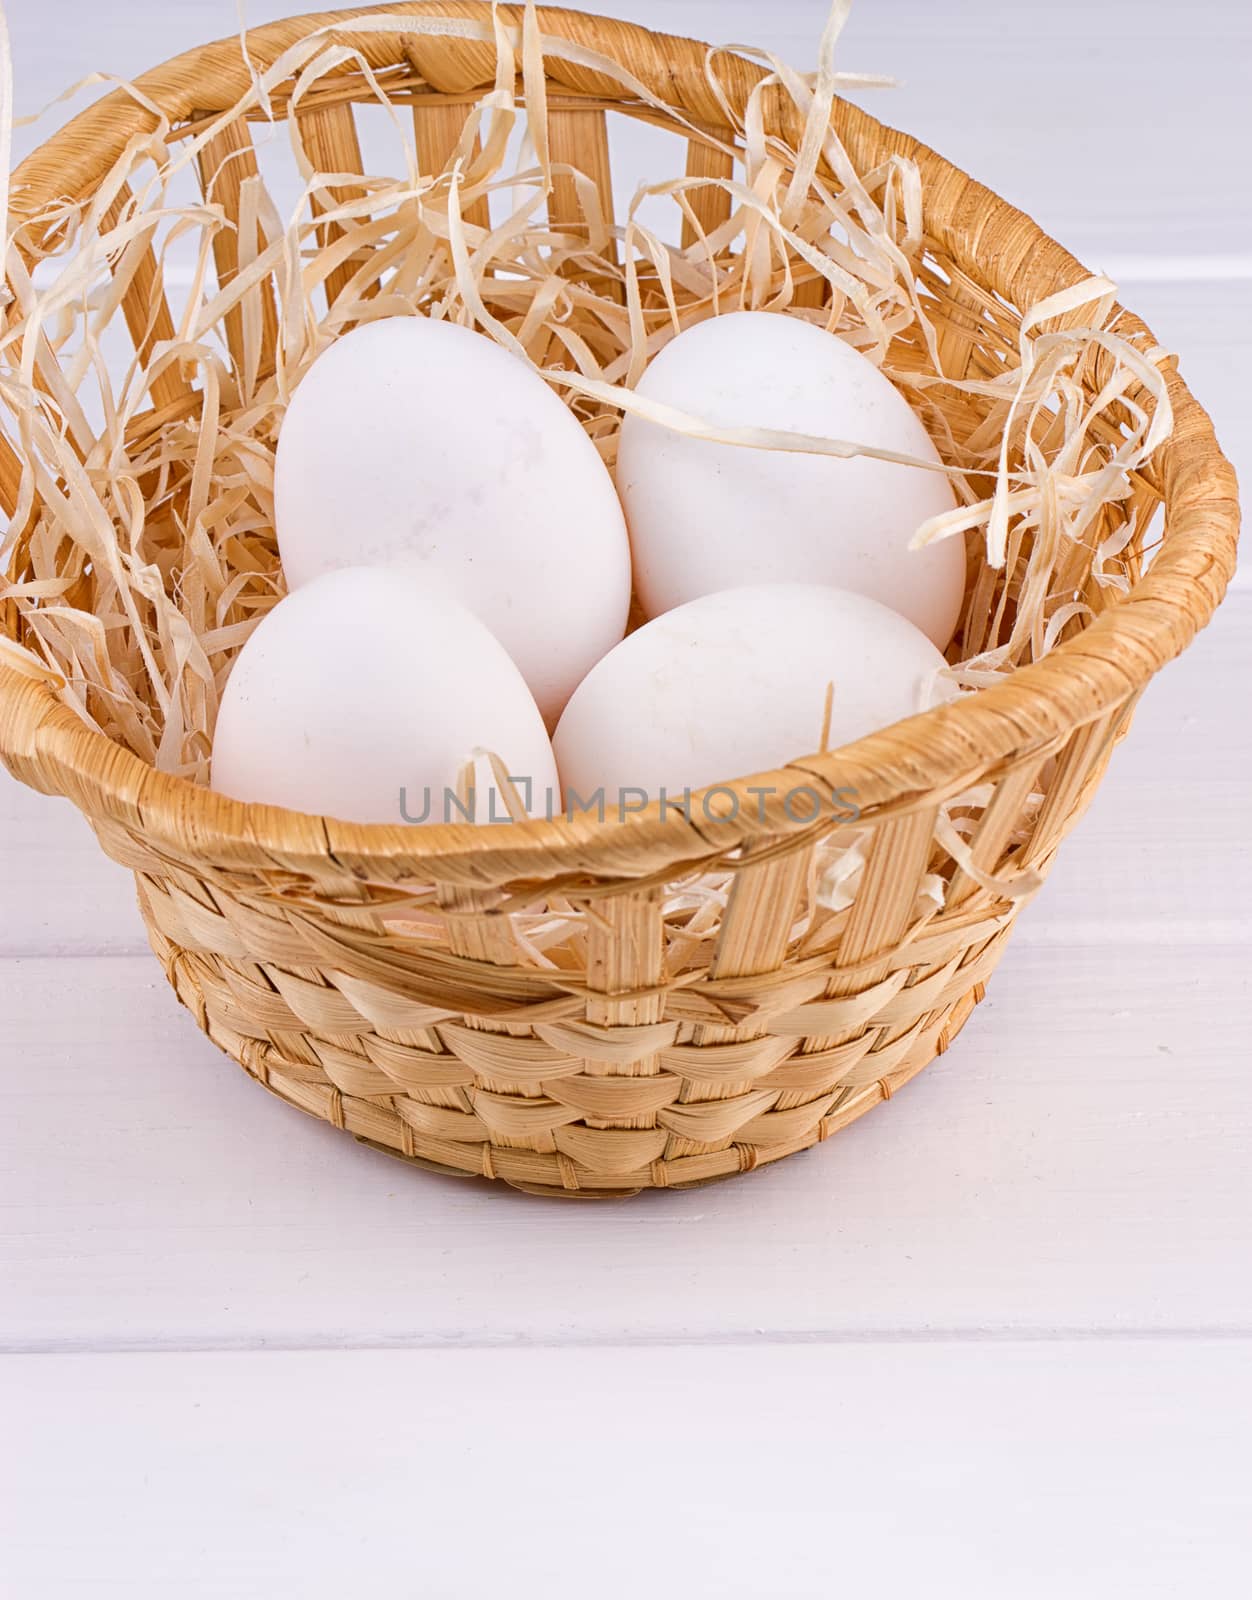 Eggs in basket by victosha